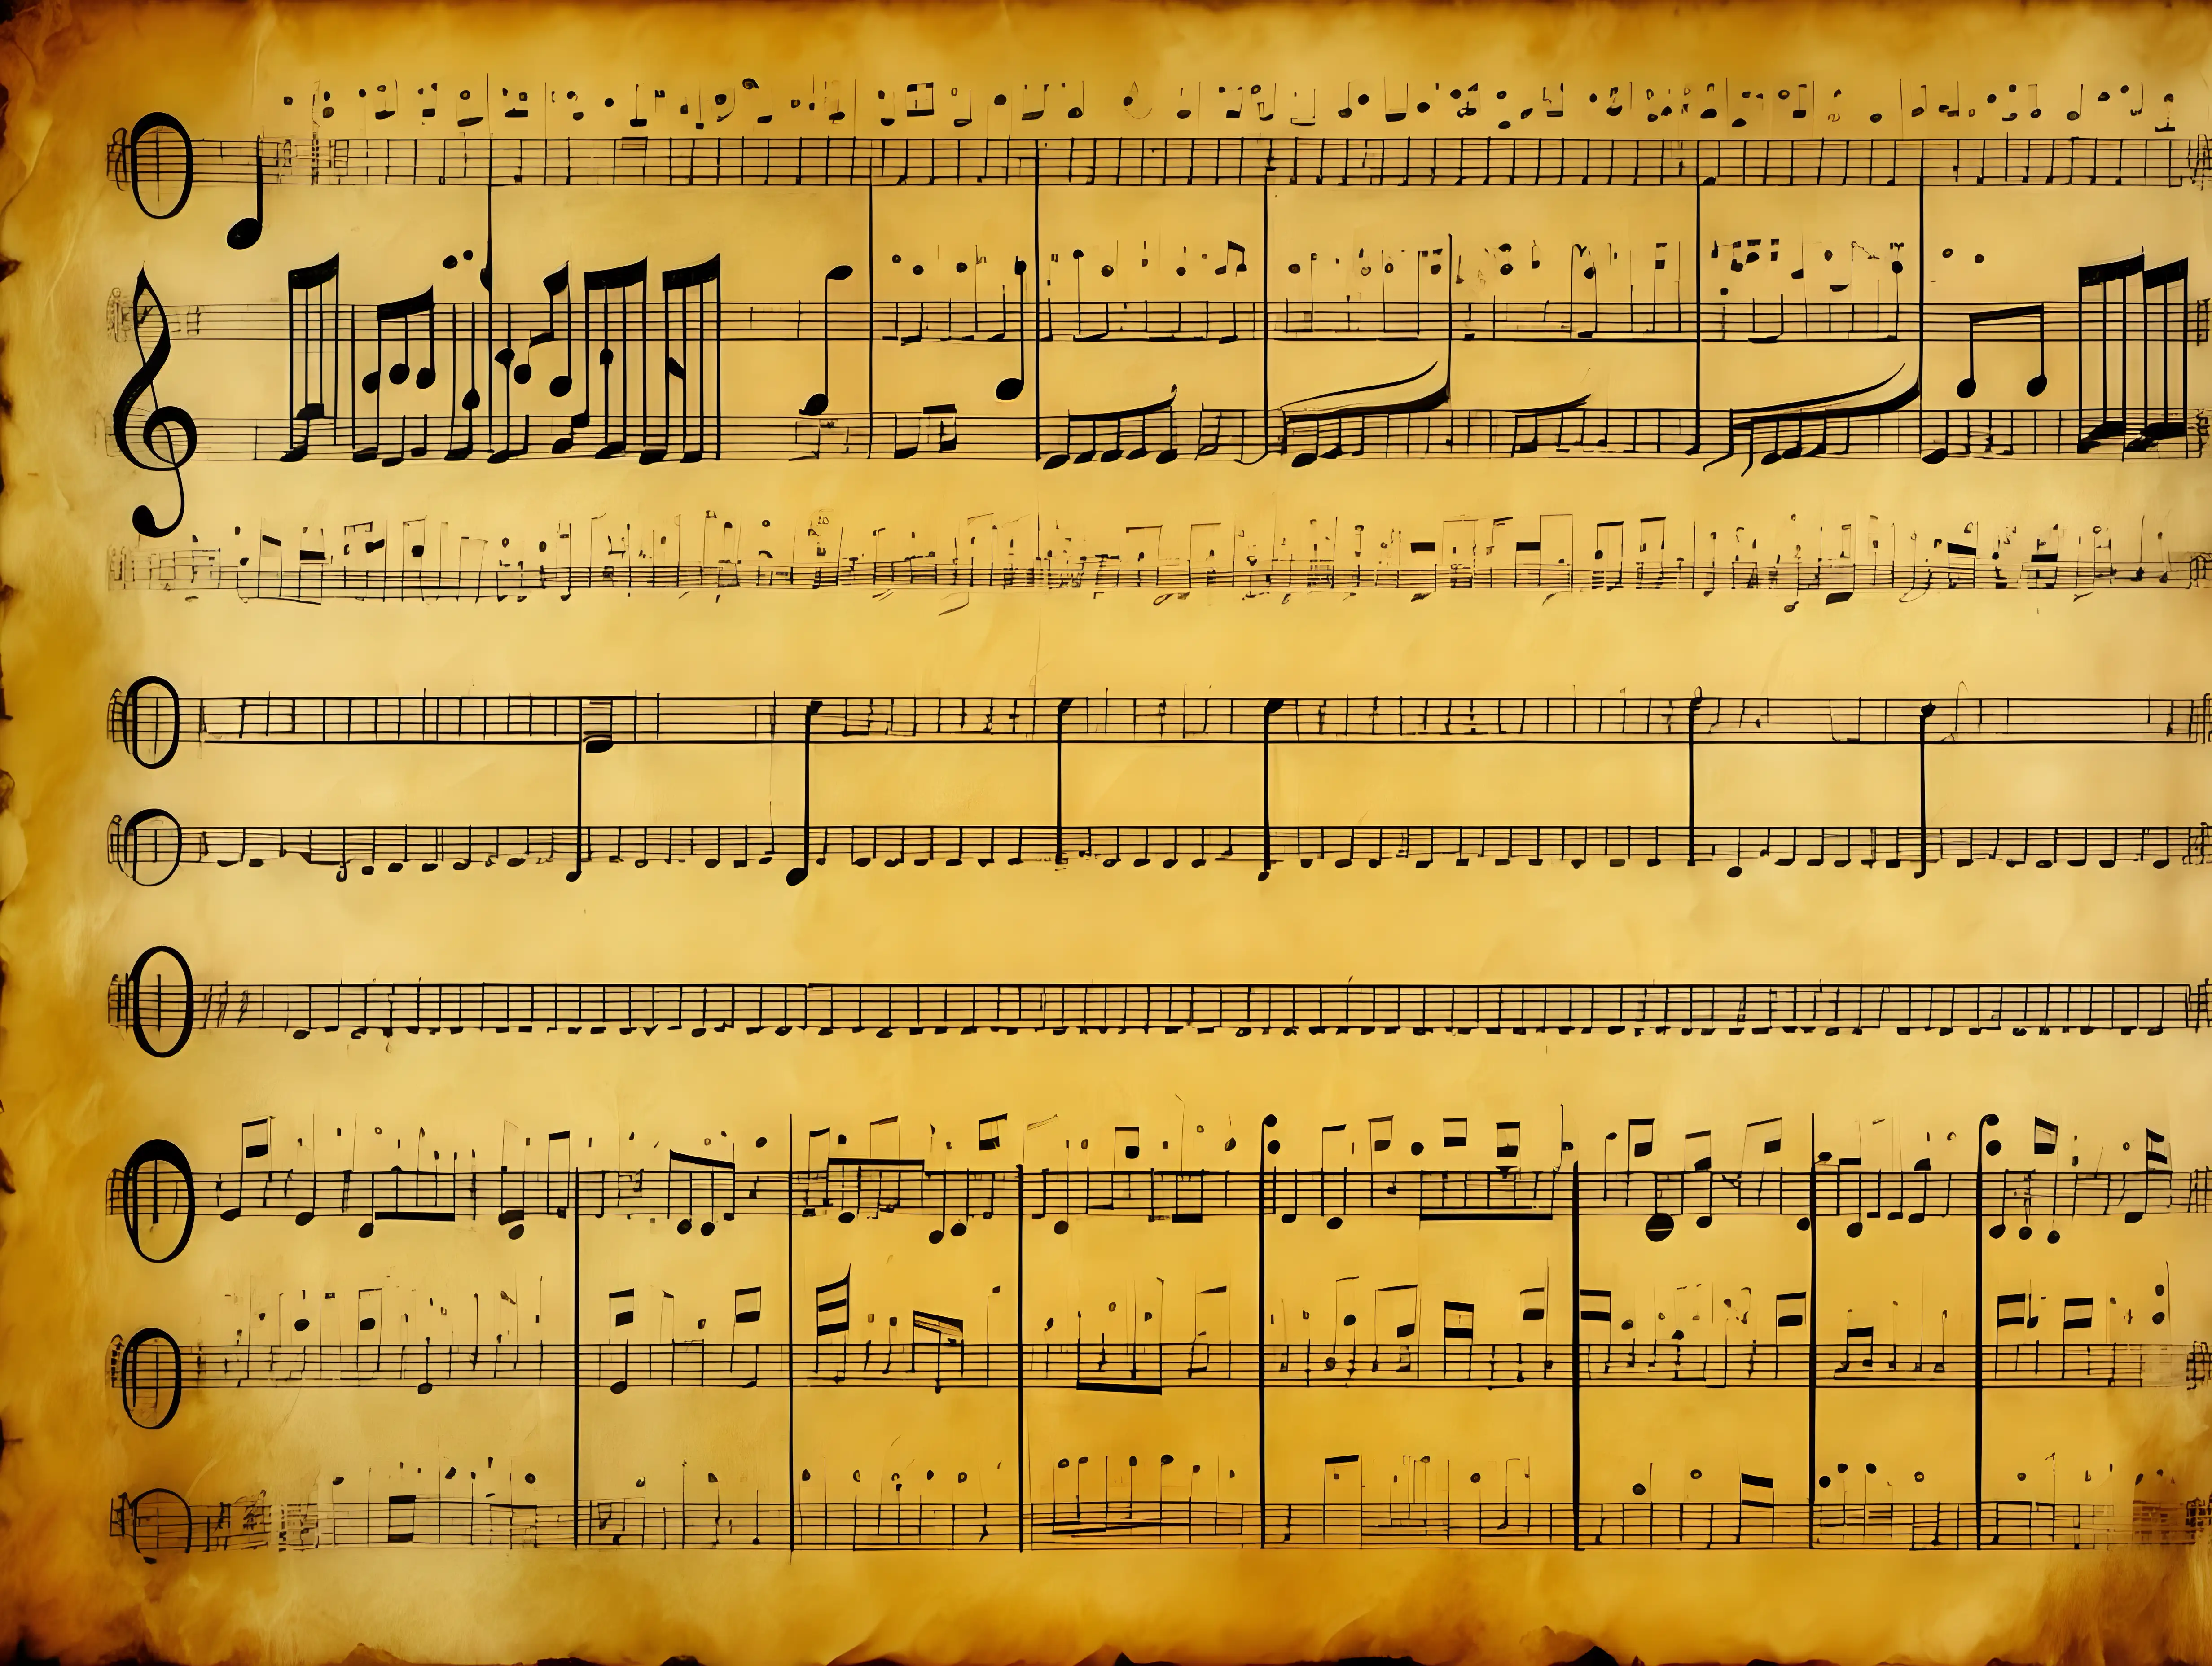 symphonic music notes on an old yellow parchment